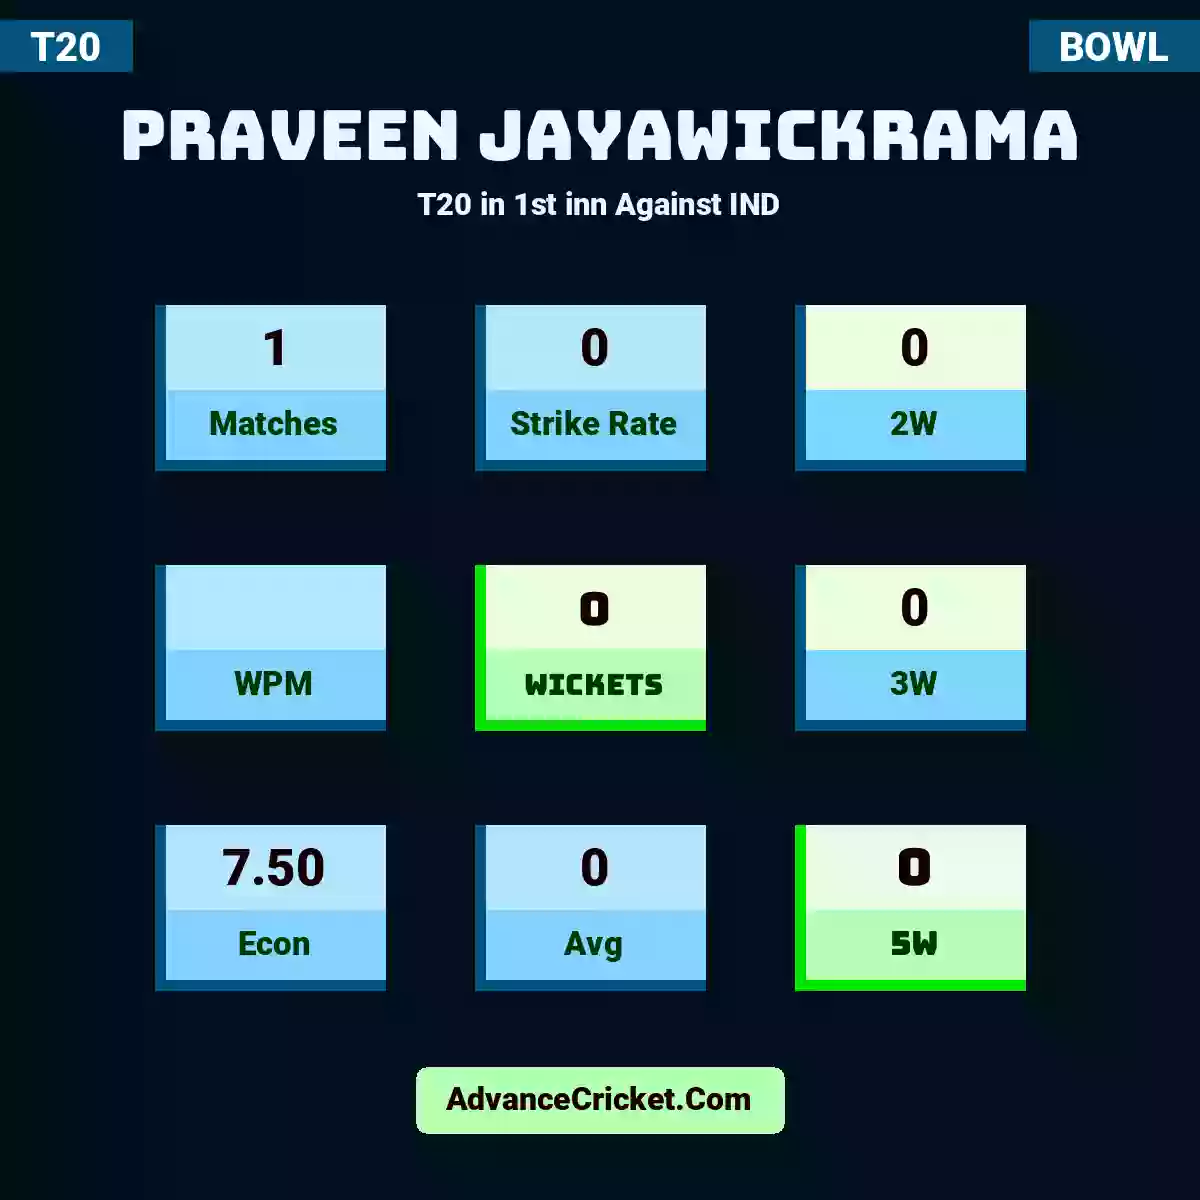 Praveen Jayawickrama T20  in 1st inn Against IND, Praveen Jayawickrama played 1 match in this T20 mode, with a SR of 0. P.Jayawickrama took 0 2W, with a WPM of . Praveen Jayawickrama secured 0 wickets, including 0 3W hauls, with an Econ of 7.50 and Avg of 0. Additionally, P.Jayawickrama achieved 0 5